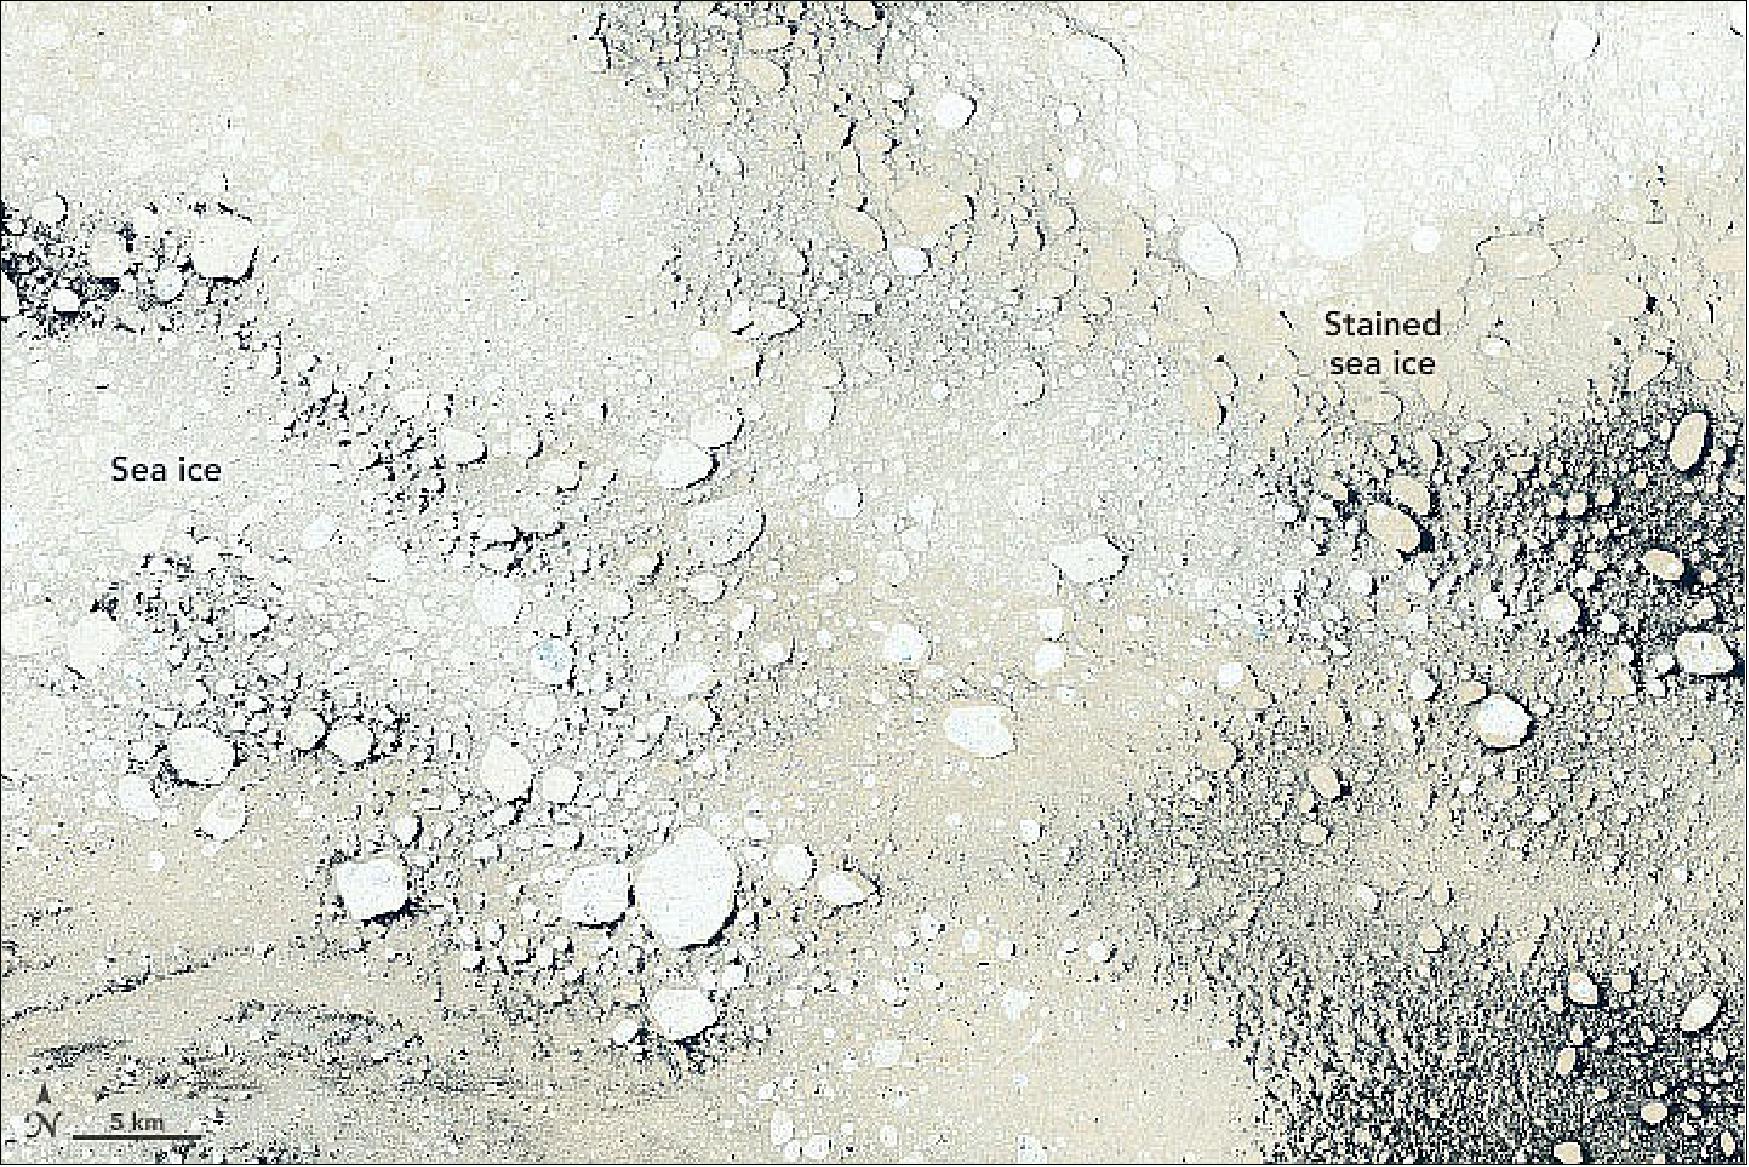 Figure 93: More than 400 years later, the phenomenon continues to stand out, even in satellite imagery. The Operational Land Imager (OLI) on Landsat-8 captured this image of beige ice drifting south of Prince Charles Island on June 22, 2016. The color is likely due to staining from silt and sediment—particles of eroded rock and soil that accumulate on the ocean floor (image credit: NASA Earth Observatory image by Joshua Stevens, using Landsat data from the U.S. Geological Survey. Story by Adam Voiland)